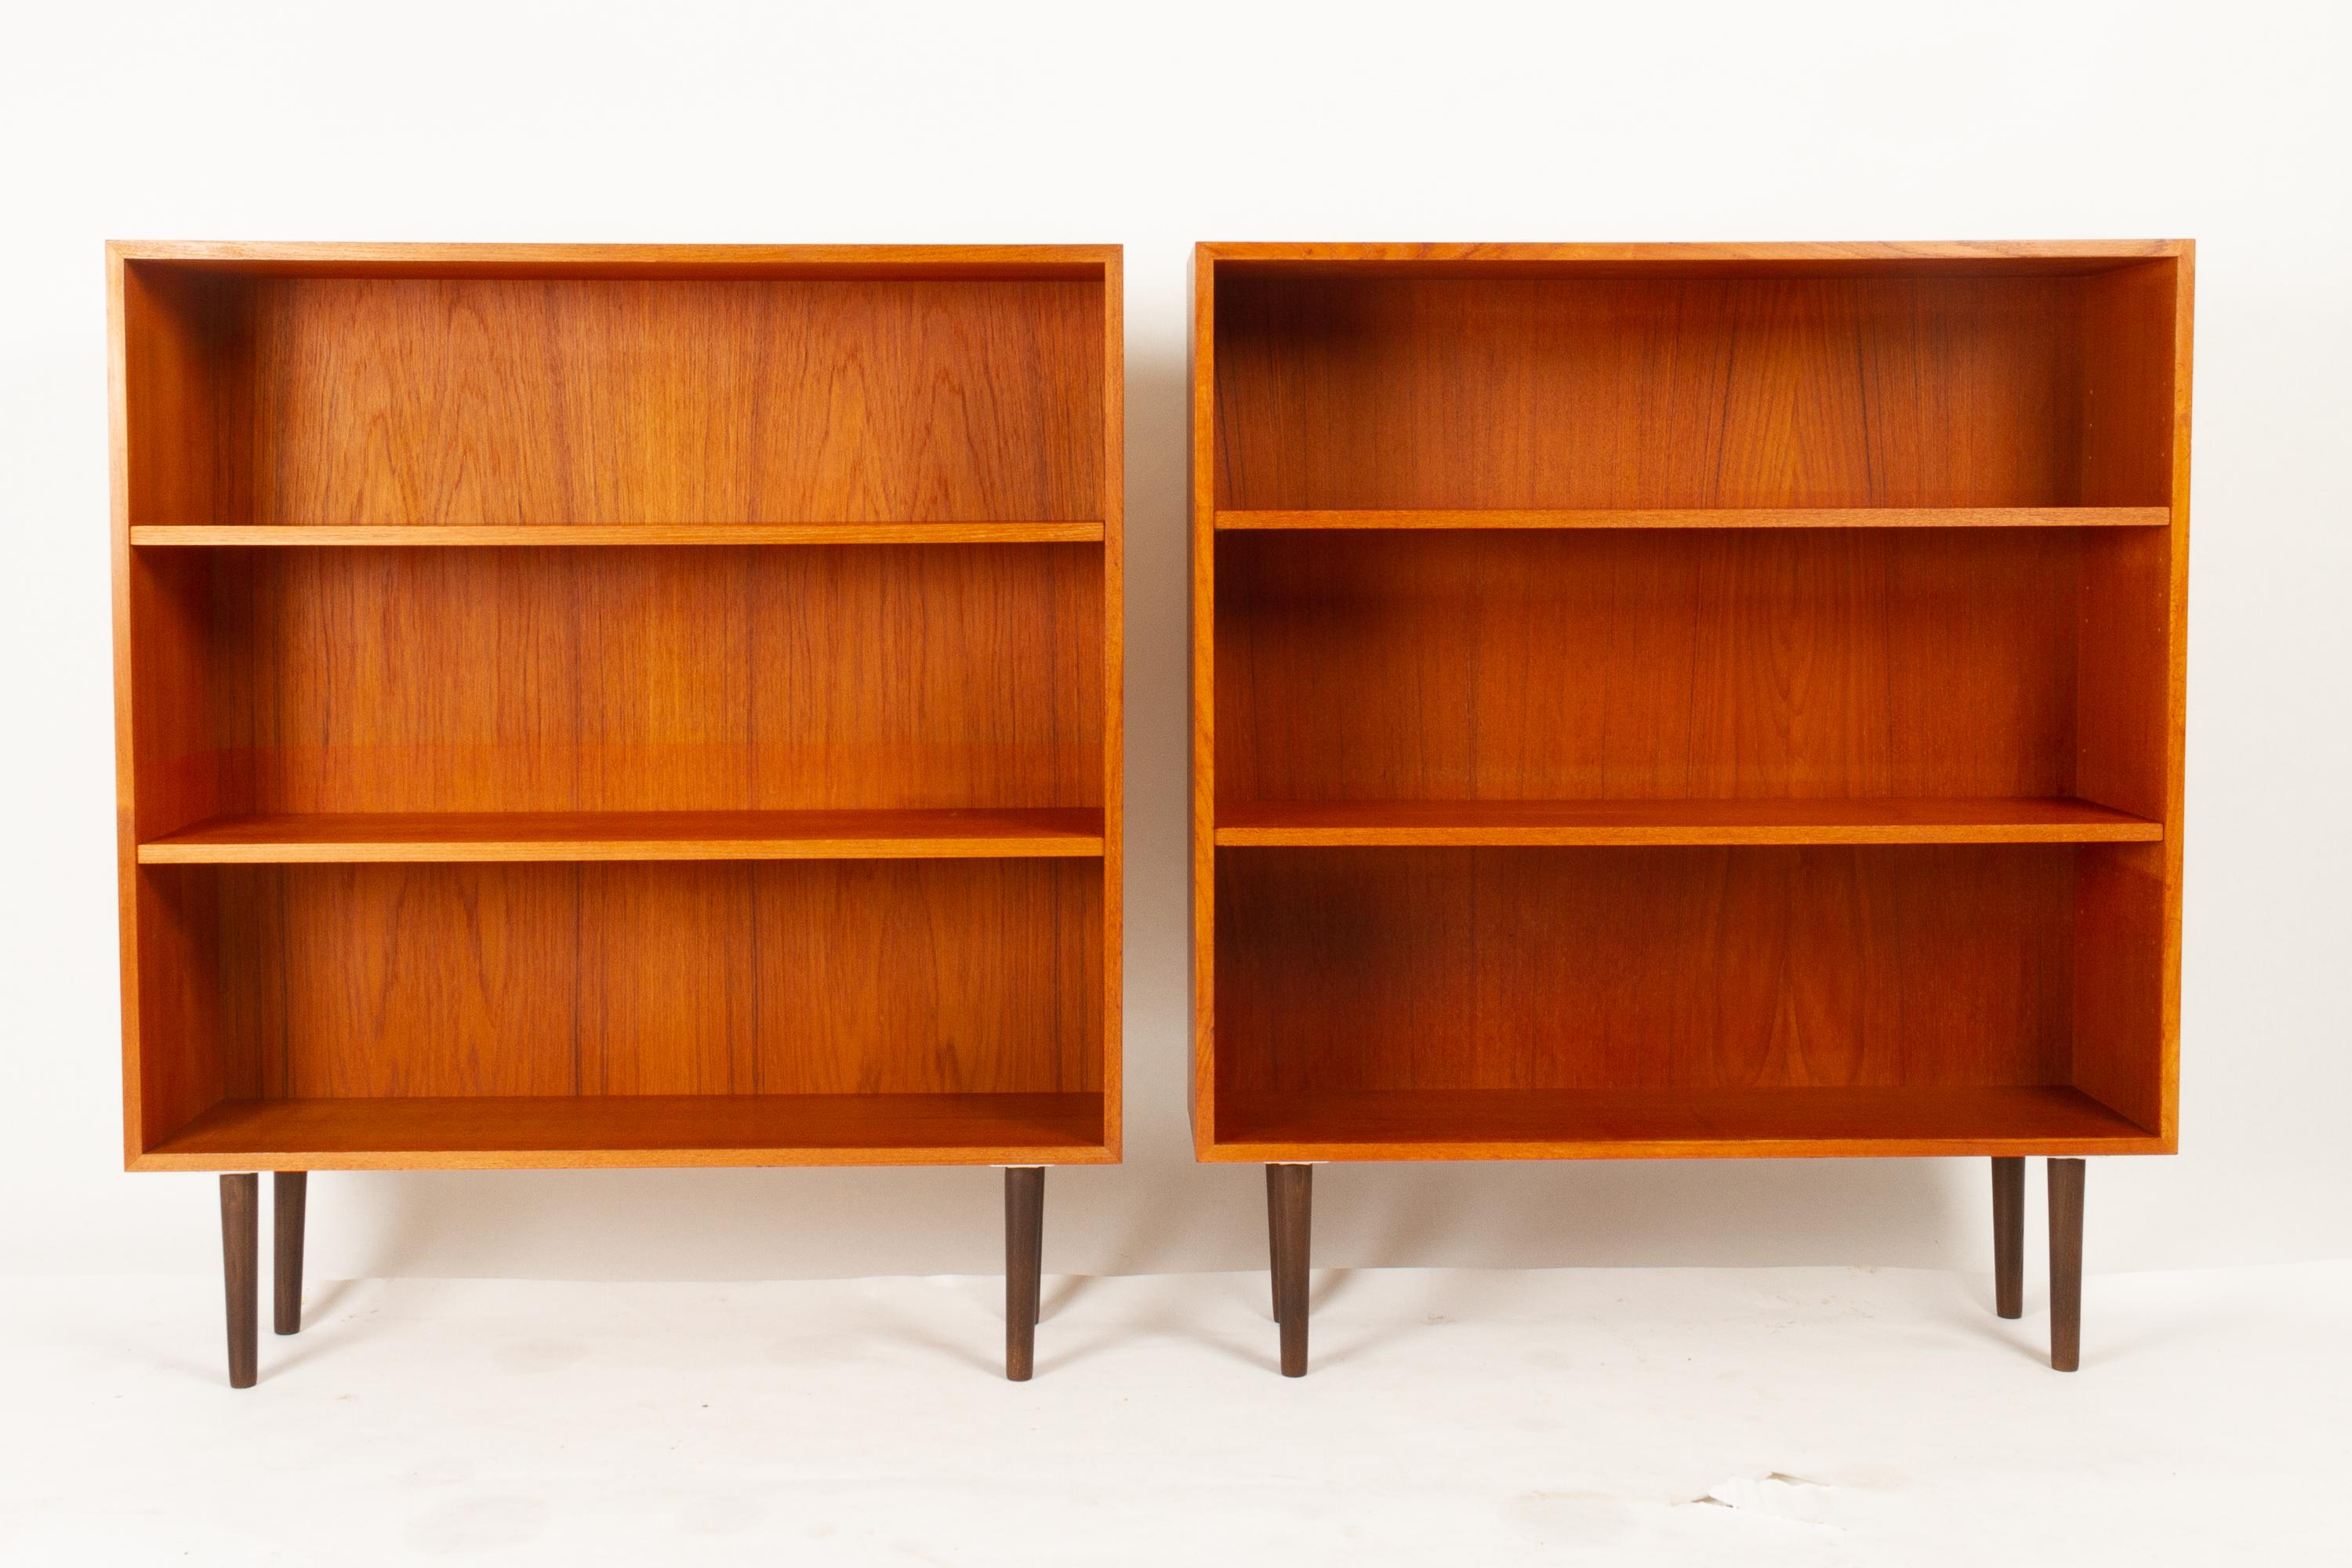 Pair of vintage Danish teak bookcases, 1960s.
Set of two matching Mid-Century Modern minimalistic bookcases in teak veneer. Each bookcase has two adjustable shelves. Standing on round tapered legs in stained oak (recent addition). Backing in teak